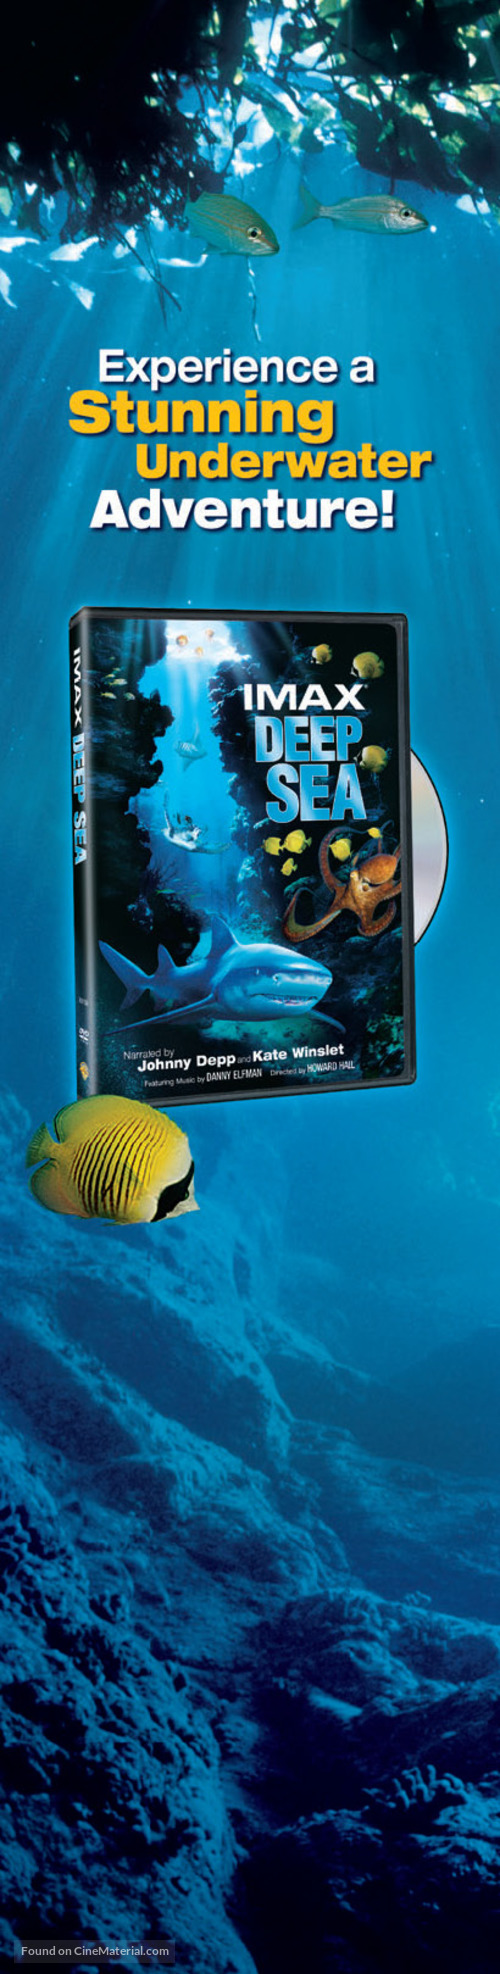 Deep Sea 3D - Video release movie poster